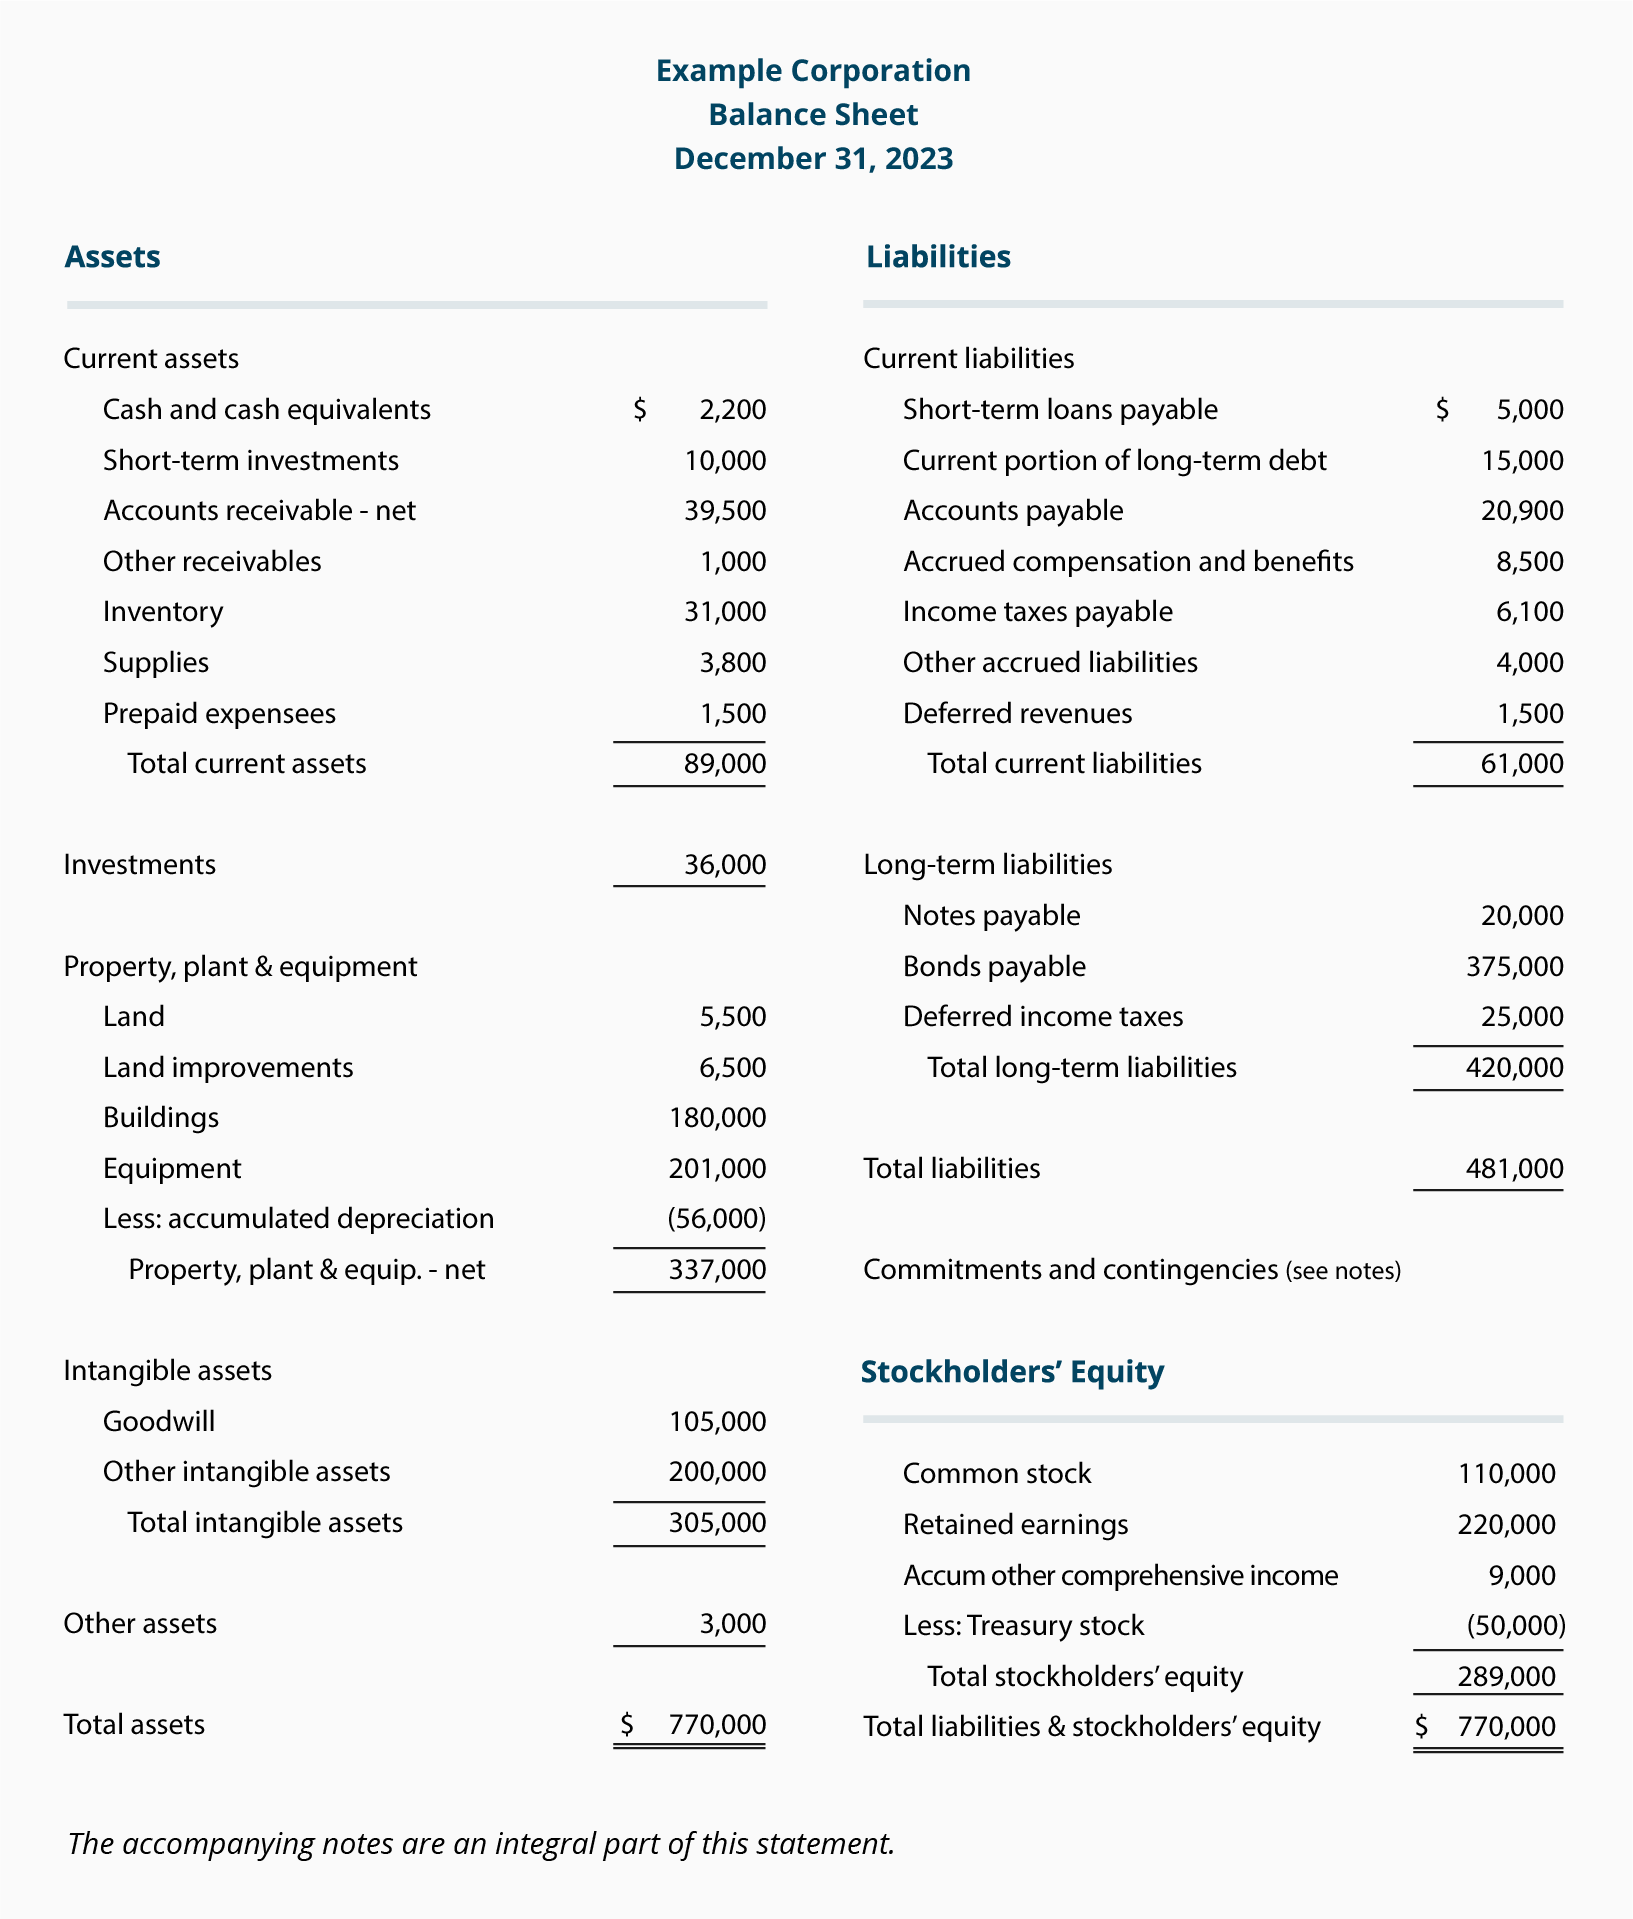 https://www.accountingcoach.com/wp-content/uploads/2013/10/balance-sheet-example@2x.png